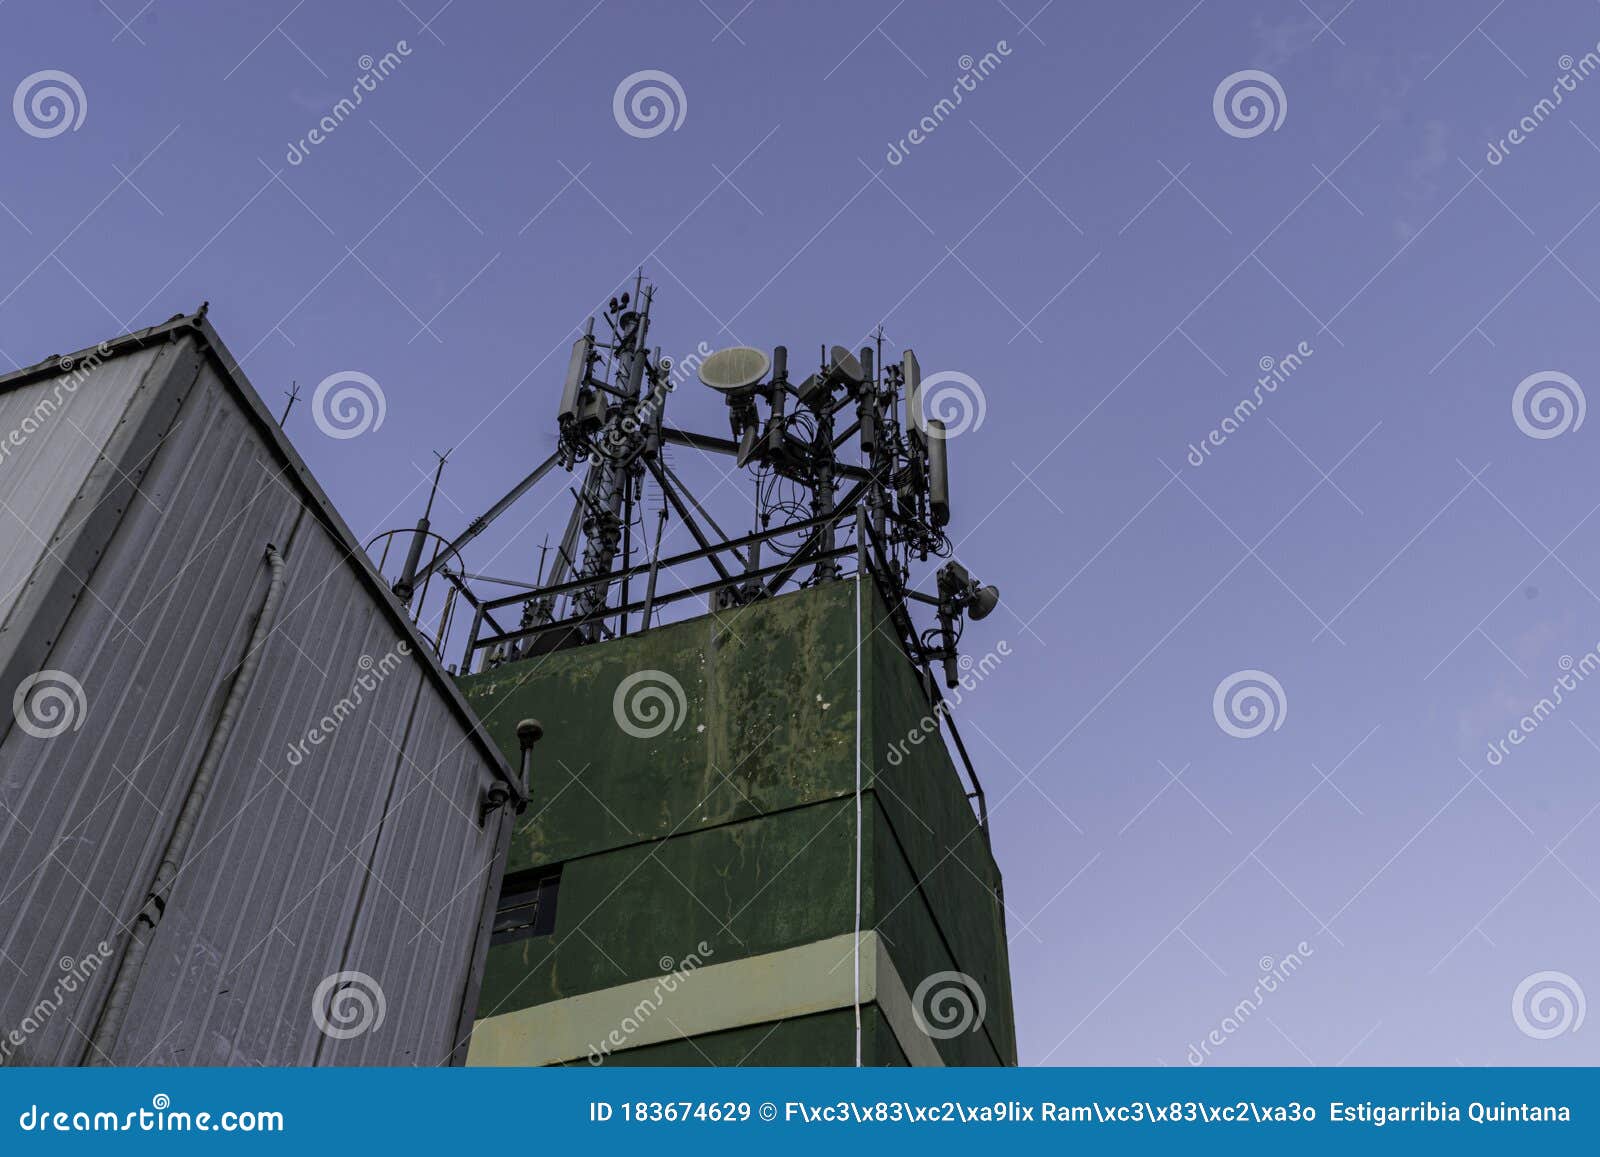 various cellular, data and radio antennas at the top of a building in suzano - sÃÂ£o paulo, brazil